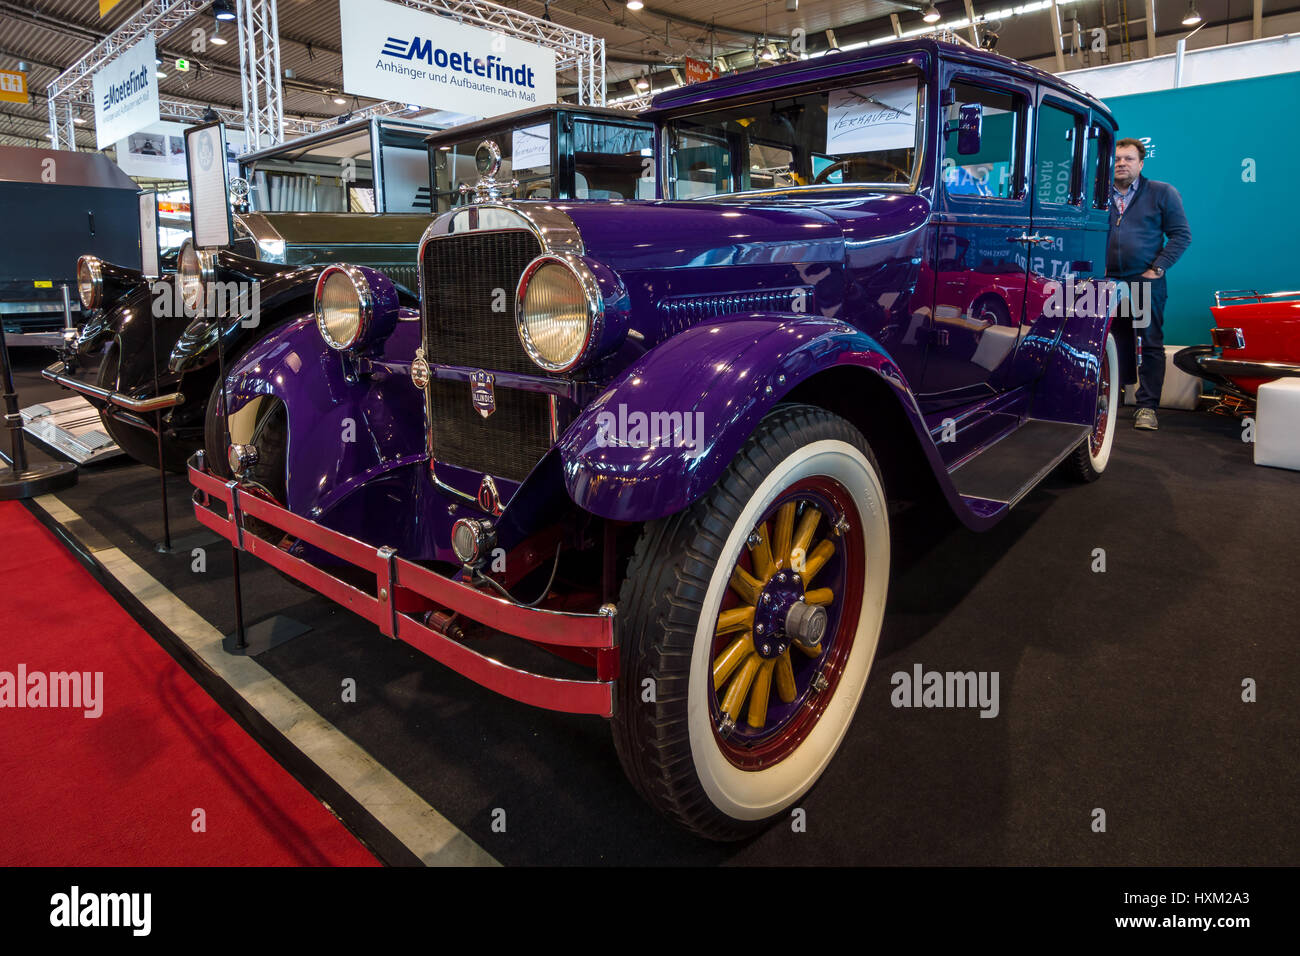 STUTTGART, GERMANY - MARCH 02, 2017: Vintage car Dodge Brothers Standard Six, 1928. Europe's greatest classic car exhibition 'RETRO CLASSICS' Stock Photo